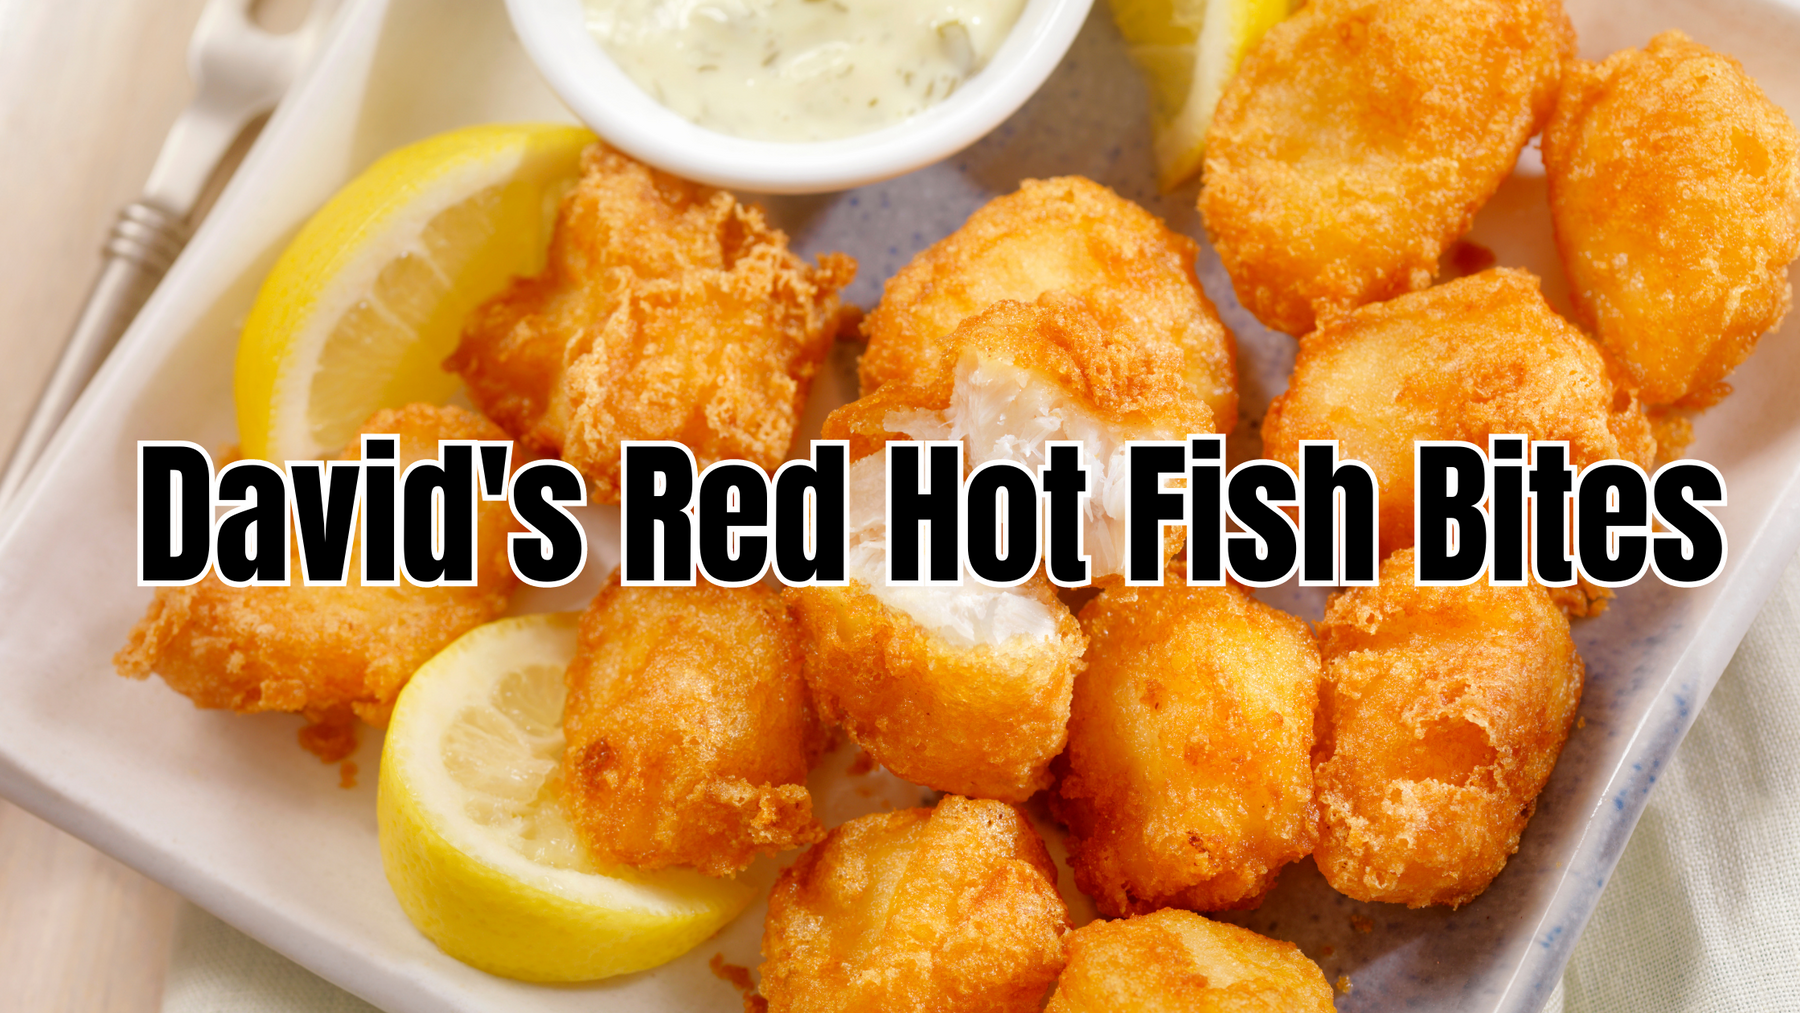 David's Red Hot Fish Bites - a great way to eat Catfish or Snakeheads